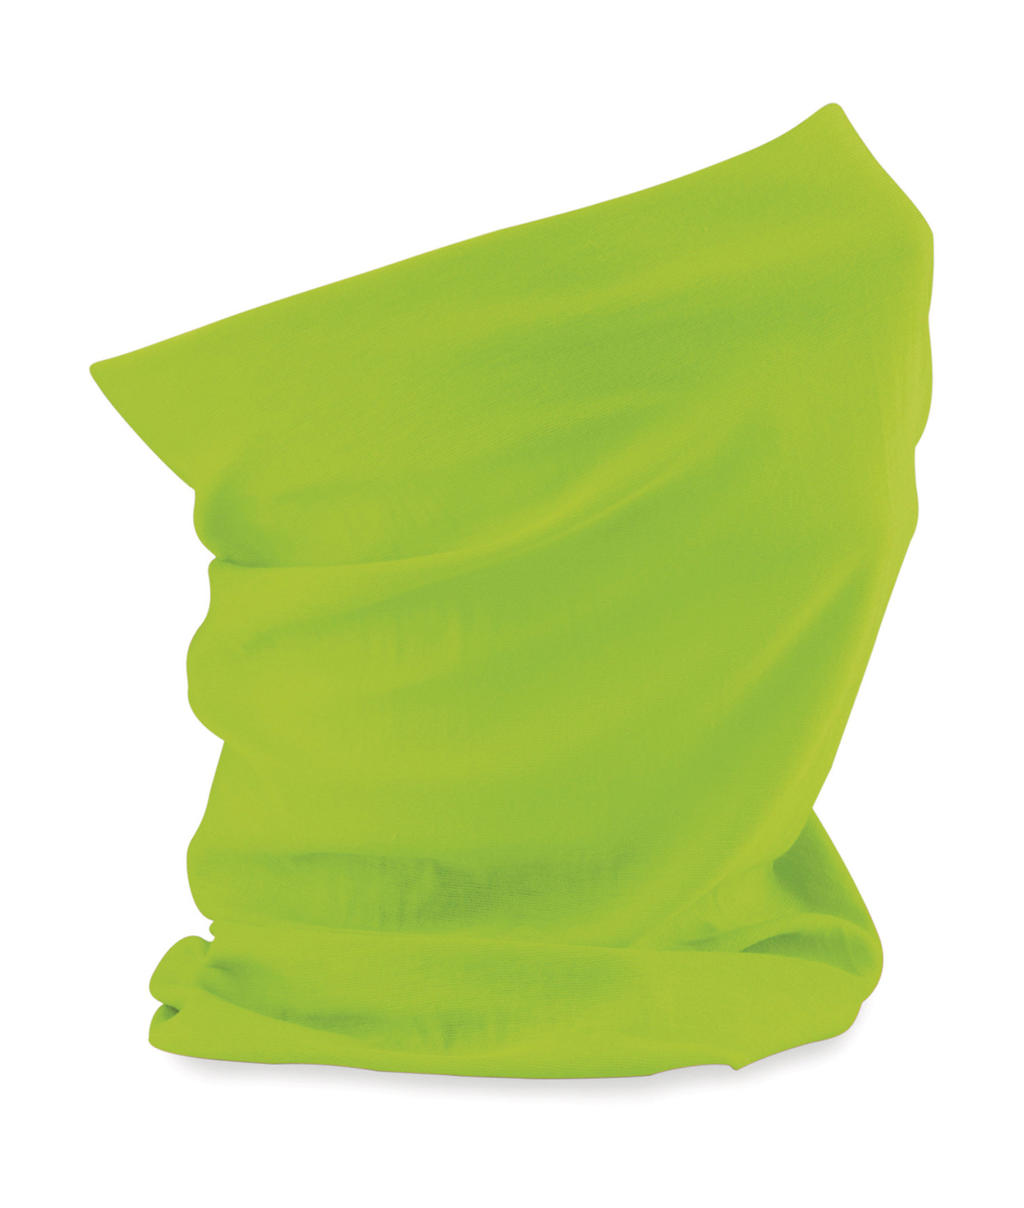  Morf? Premium Anti-Bacterial (3 pack) in Farbe Lime Green